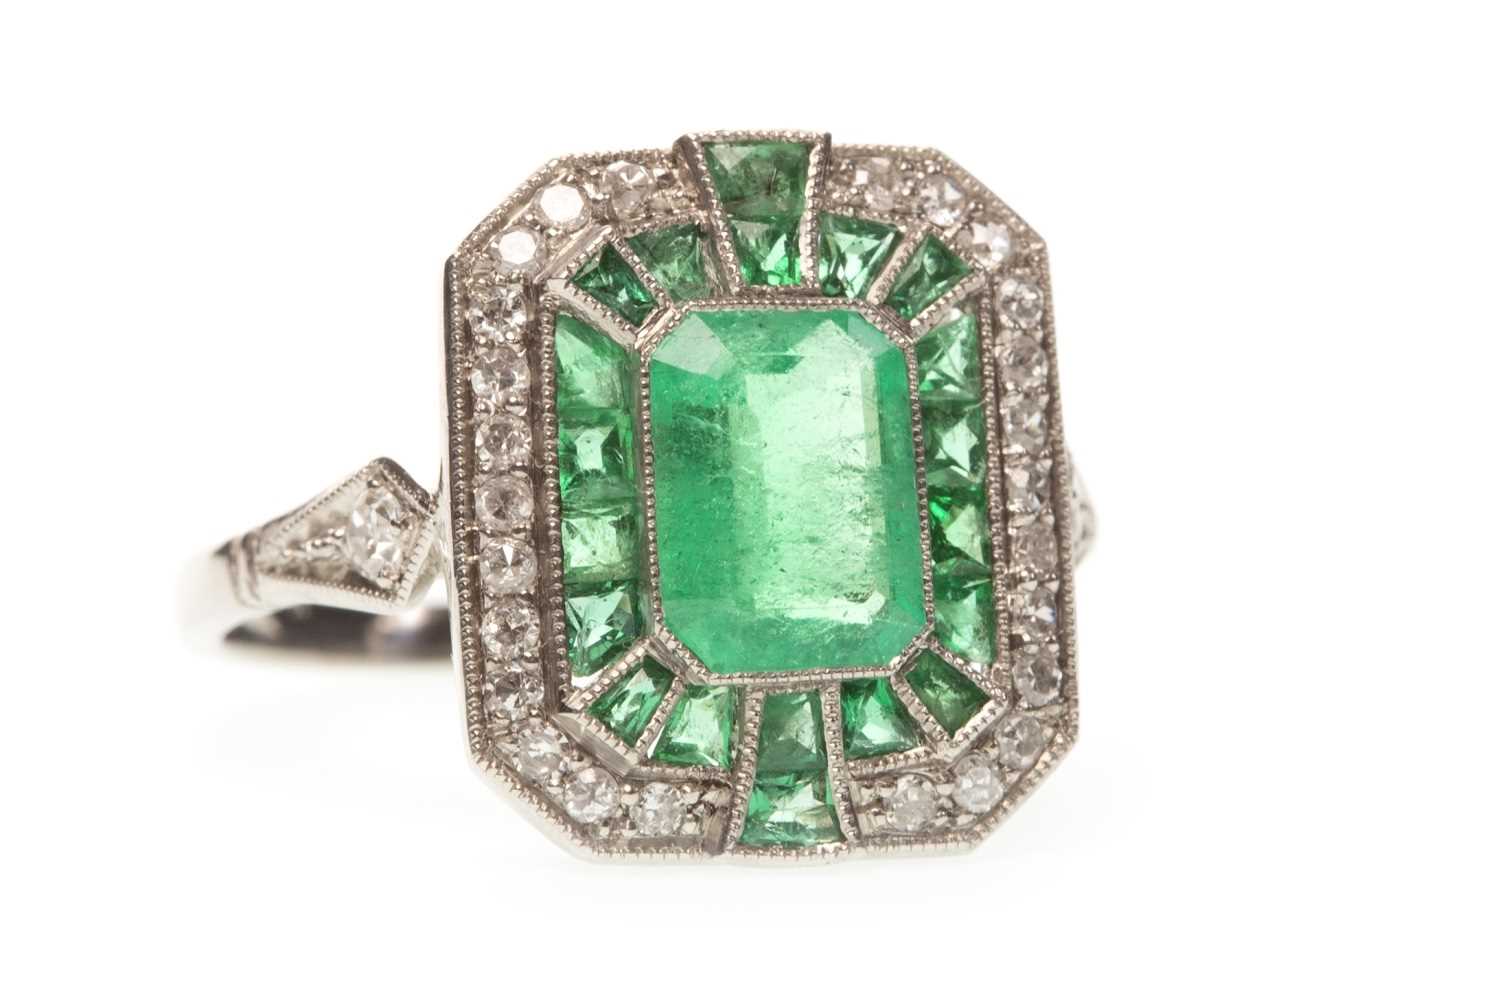 Lot 60 - AN ART DECO STYLE EMERALD AND DIAMOND RING